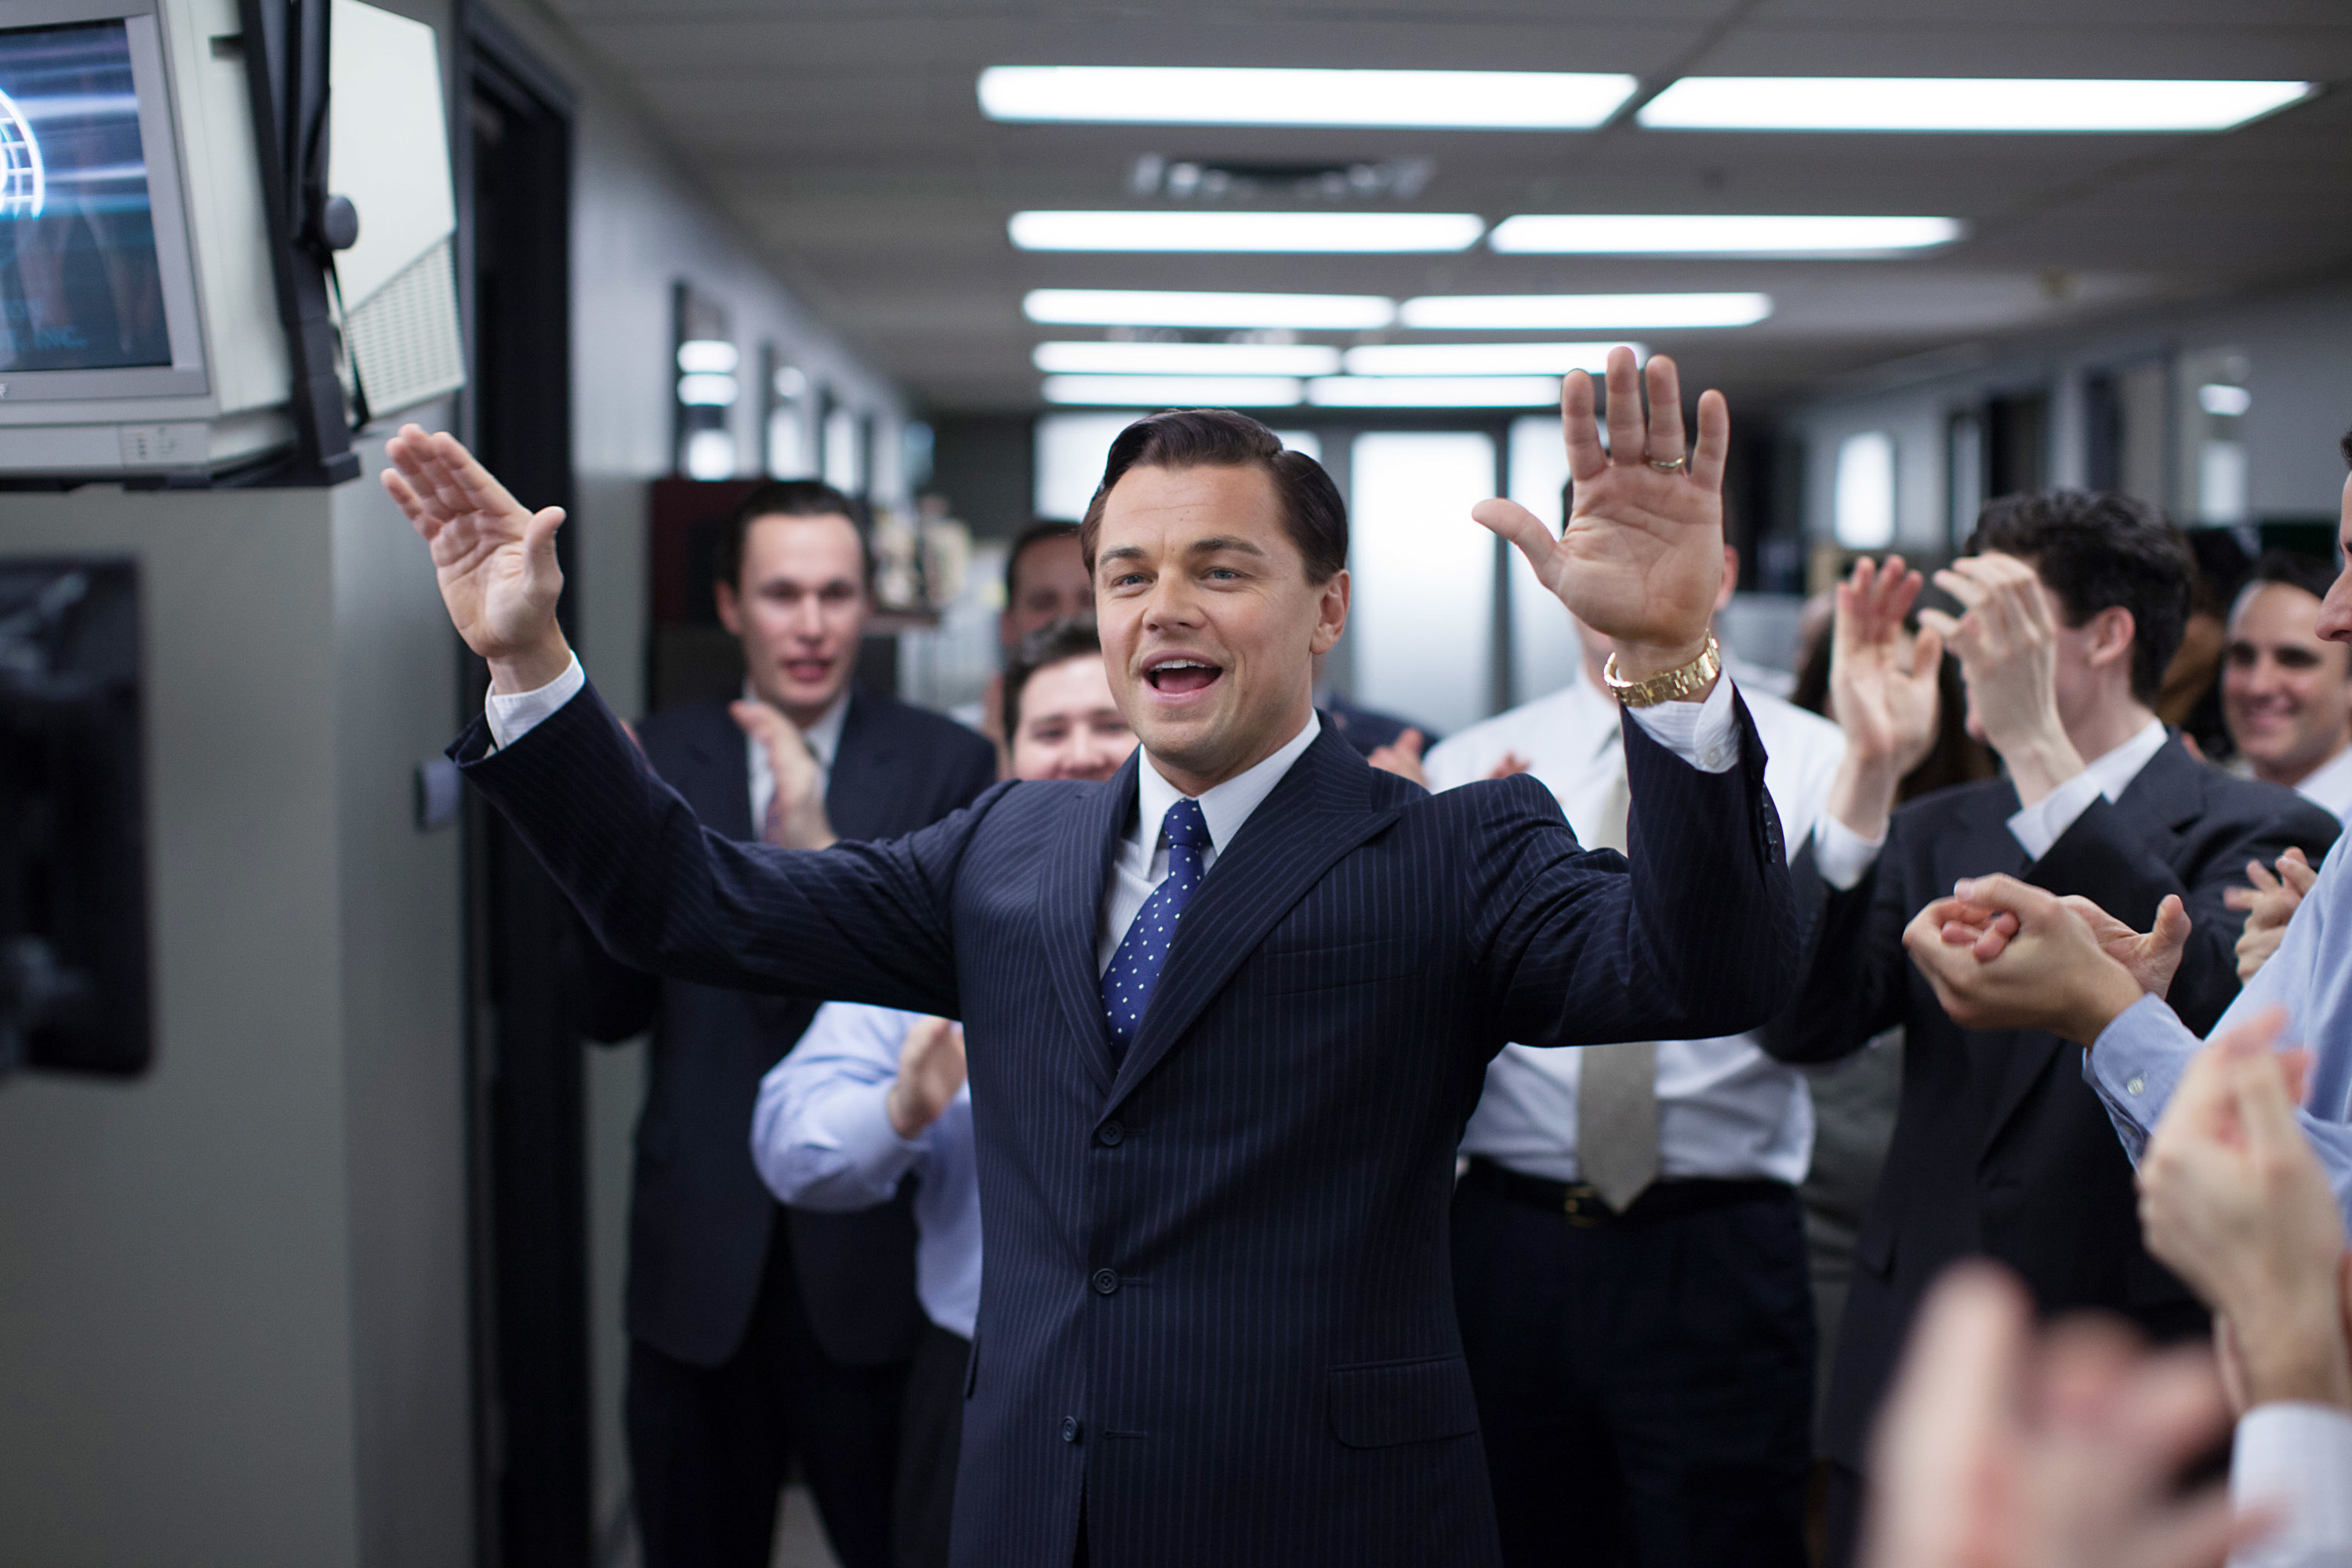 Leonardo DiCaprio in a room full of people clapping for him